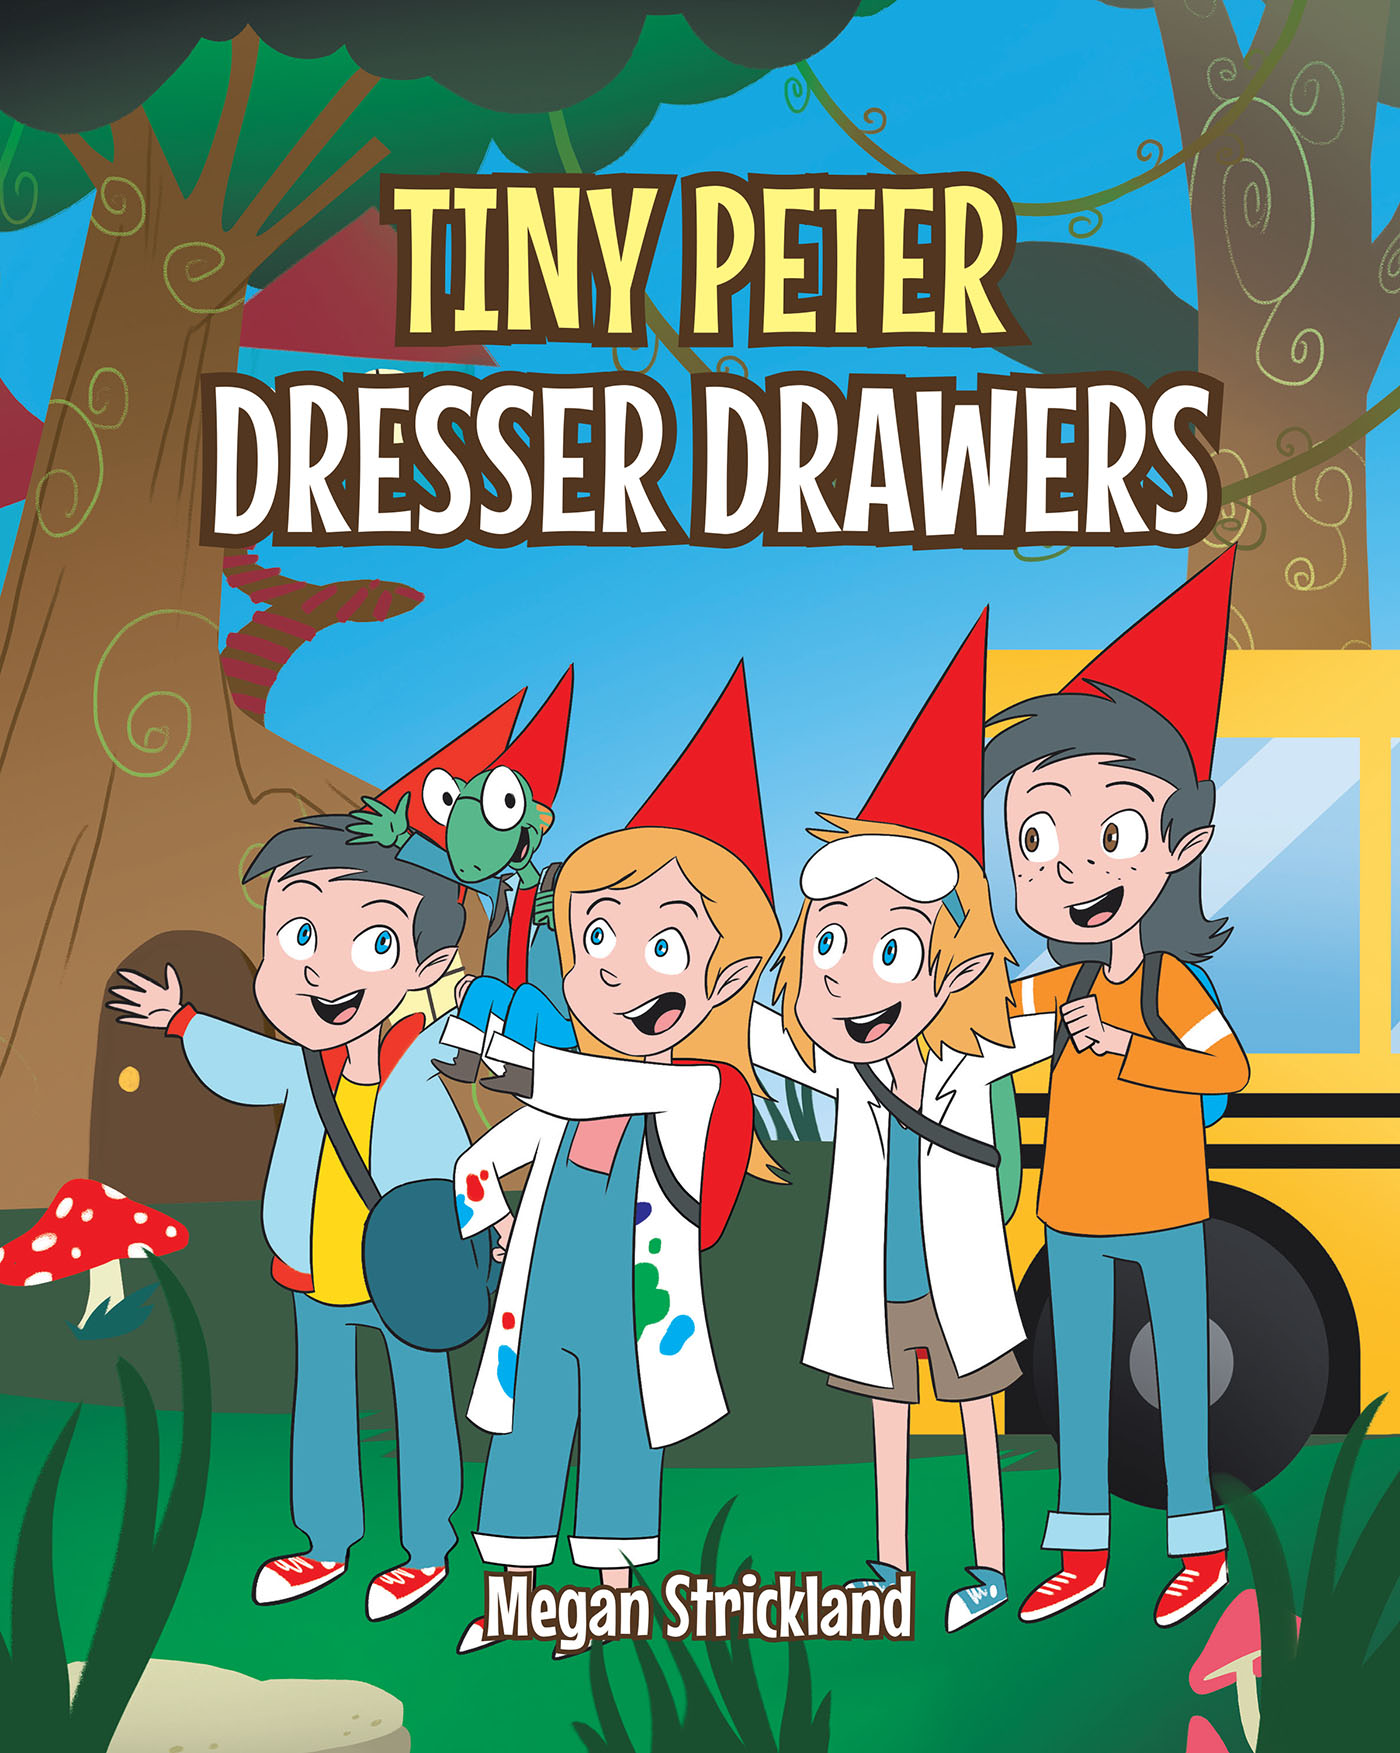 Author Megan Strickland’s New Book, "Tiny Peter Dresser Drawers," is a Sweet Story Celebrating Kindness, Compassion, and the Joys of Family for Young Readers